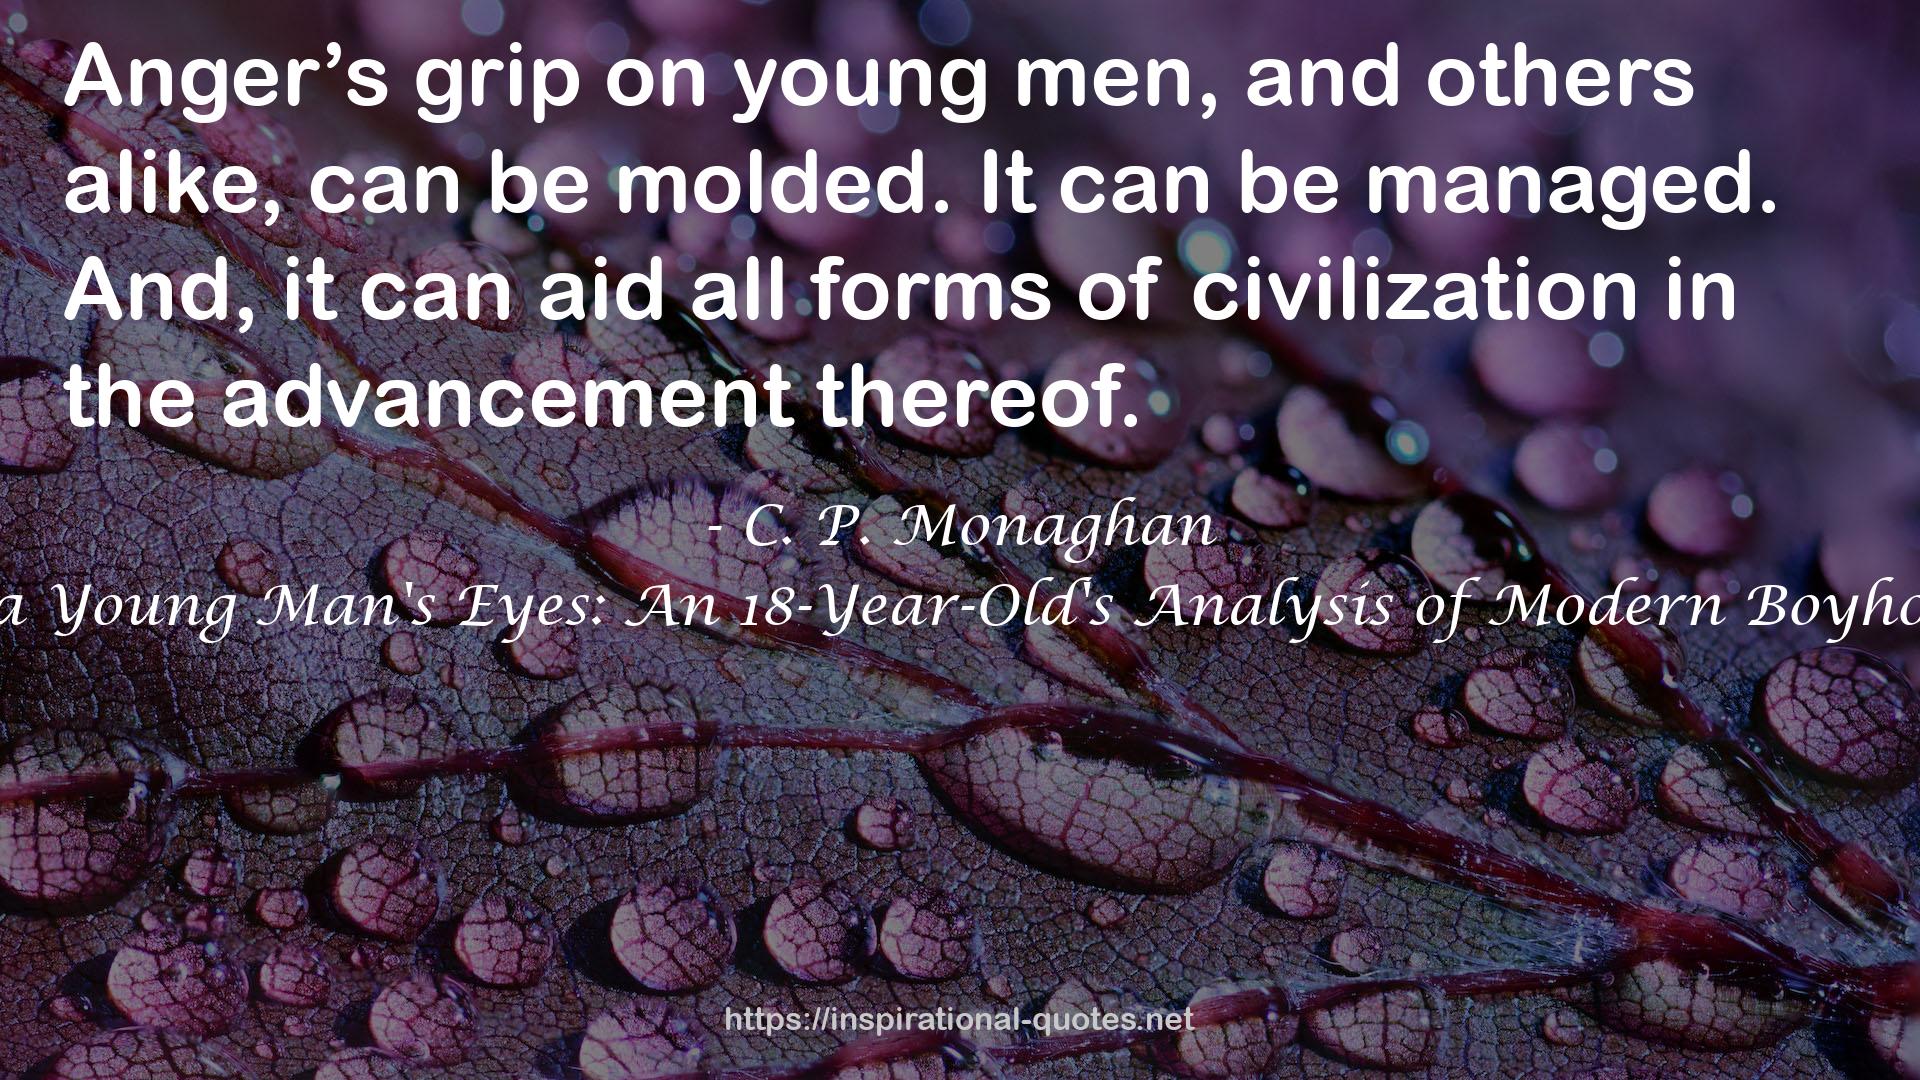 C. P. Monaghan QUOTES